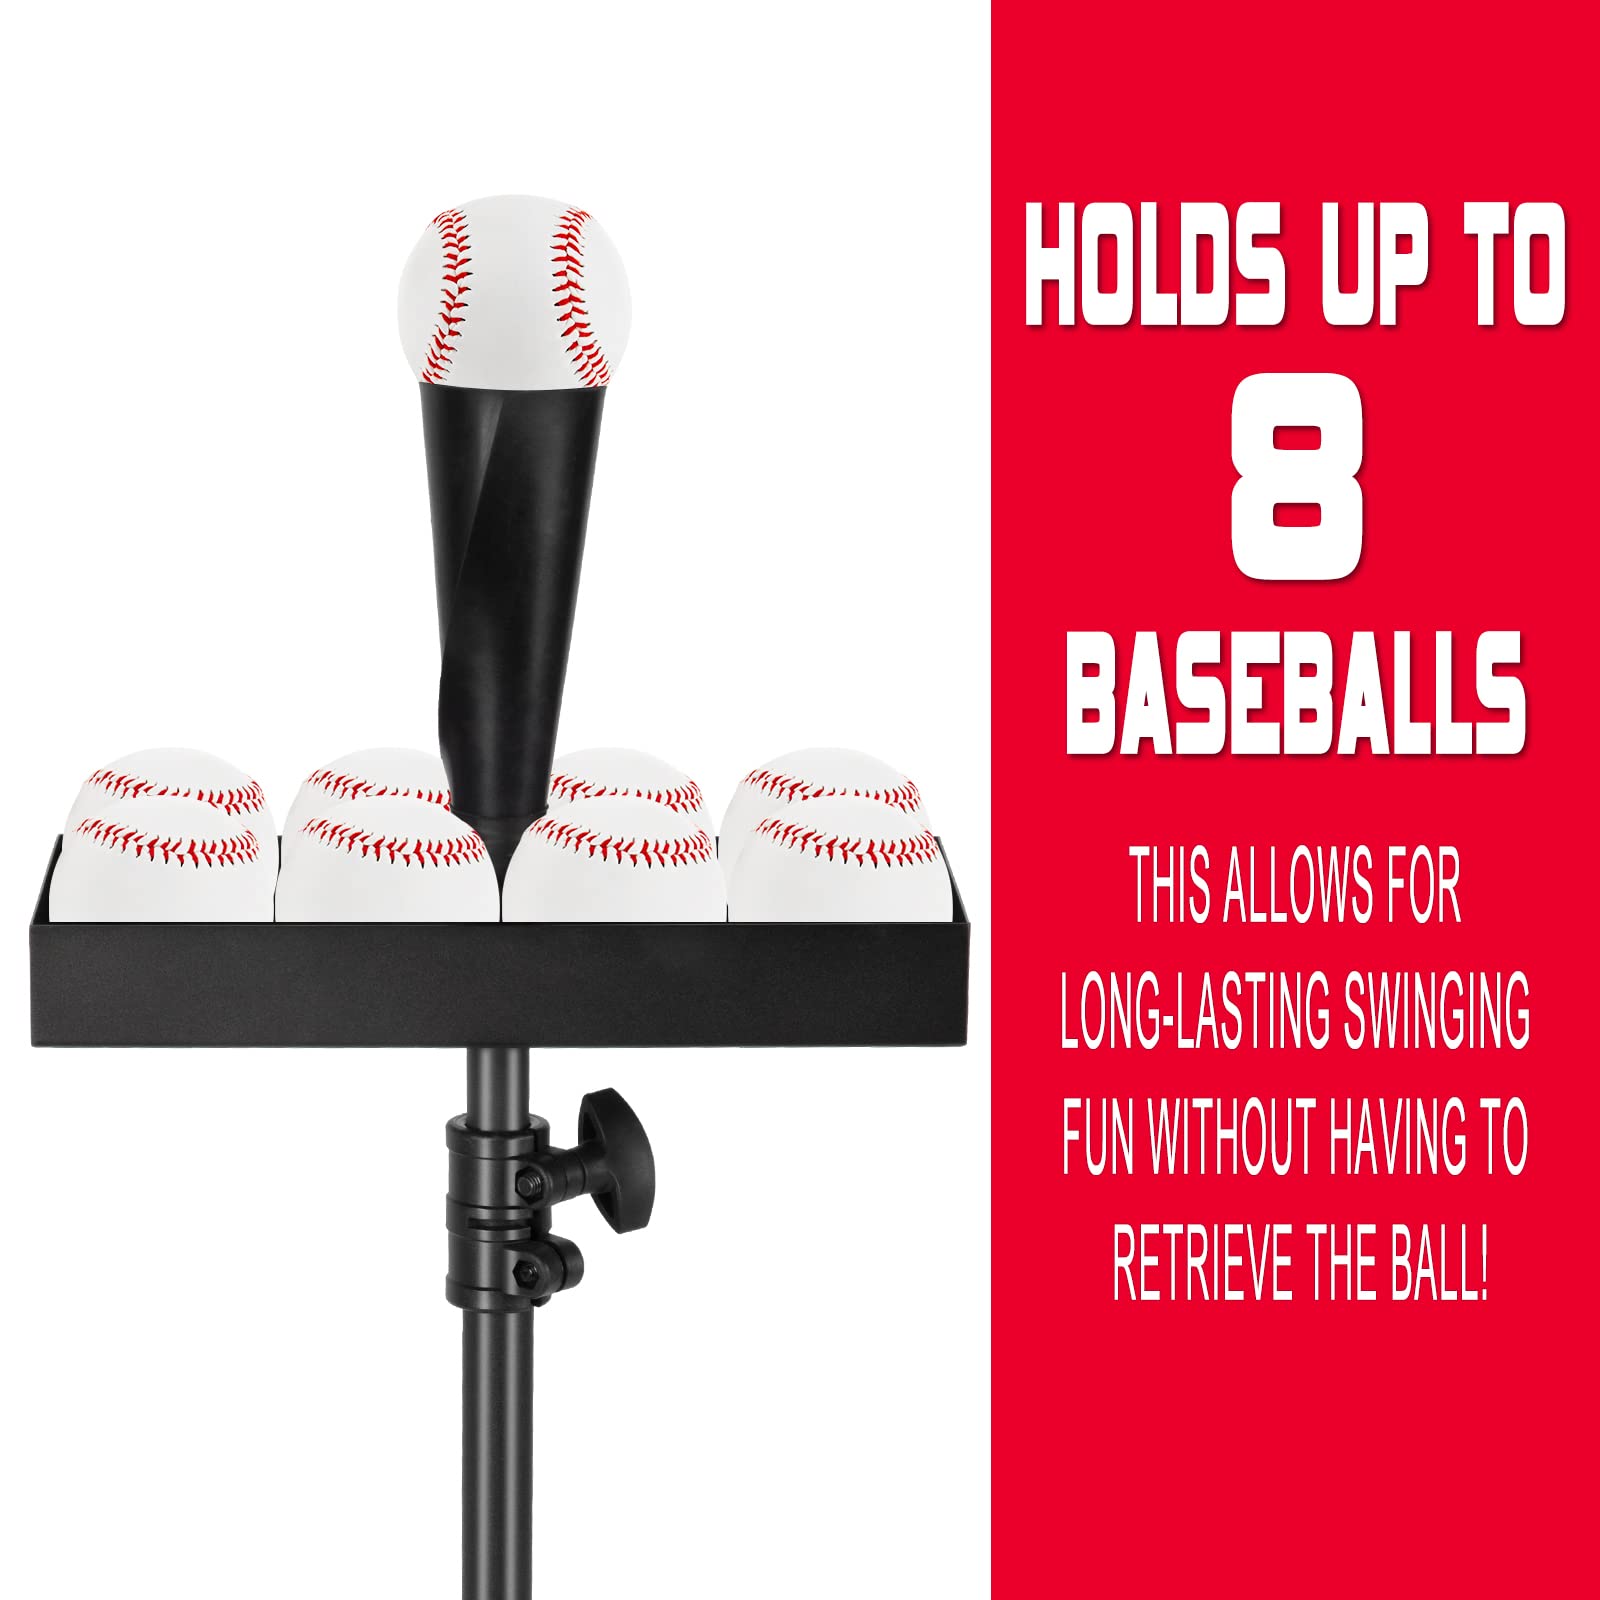 Baseball Batting tee with Storage, Portable Softball Tees for Adults and Youth Teens, Adjustable Tee Ball Stand 30 to 43 inches for Hitting Training Practice, Ideal Hitting Tee with Carrying Bag